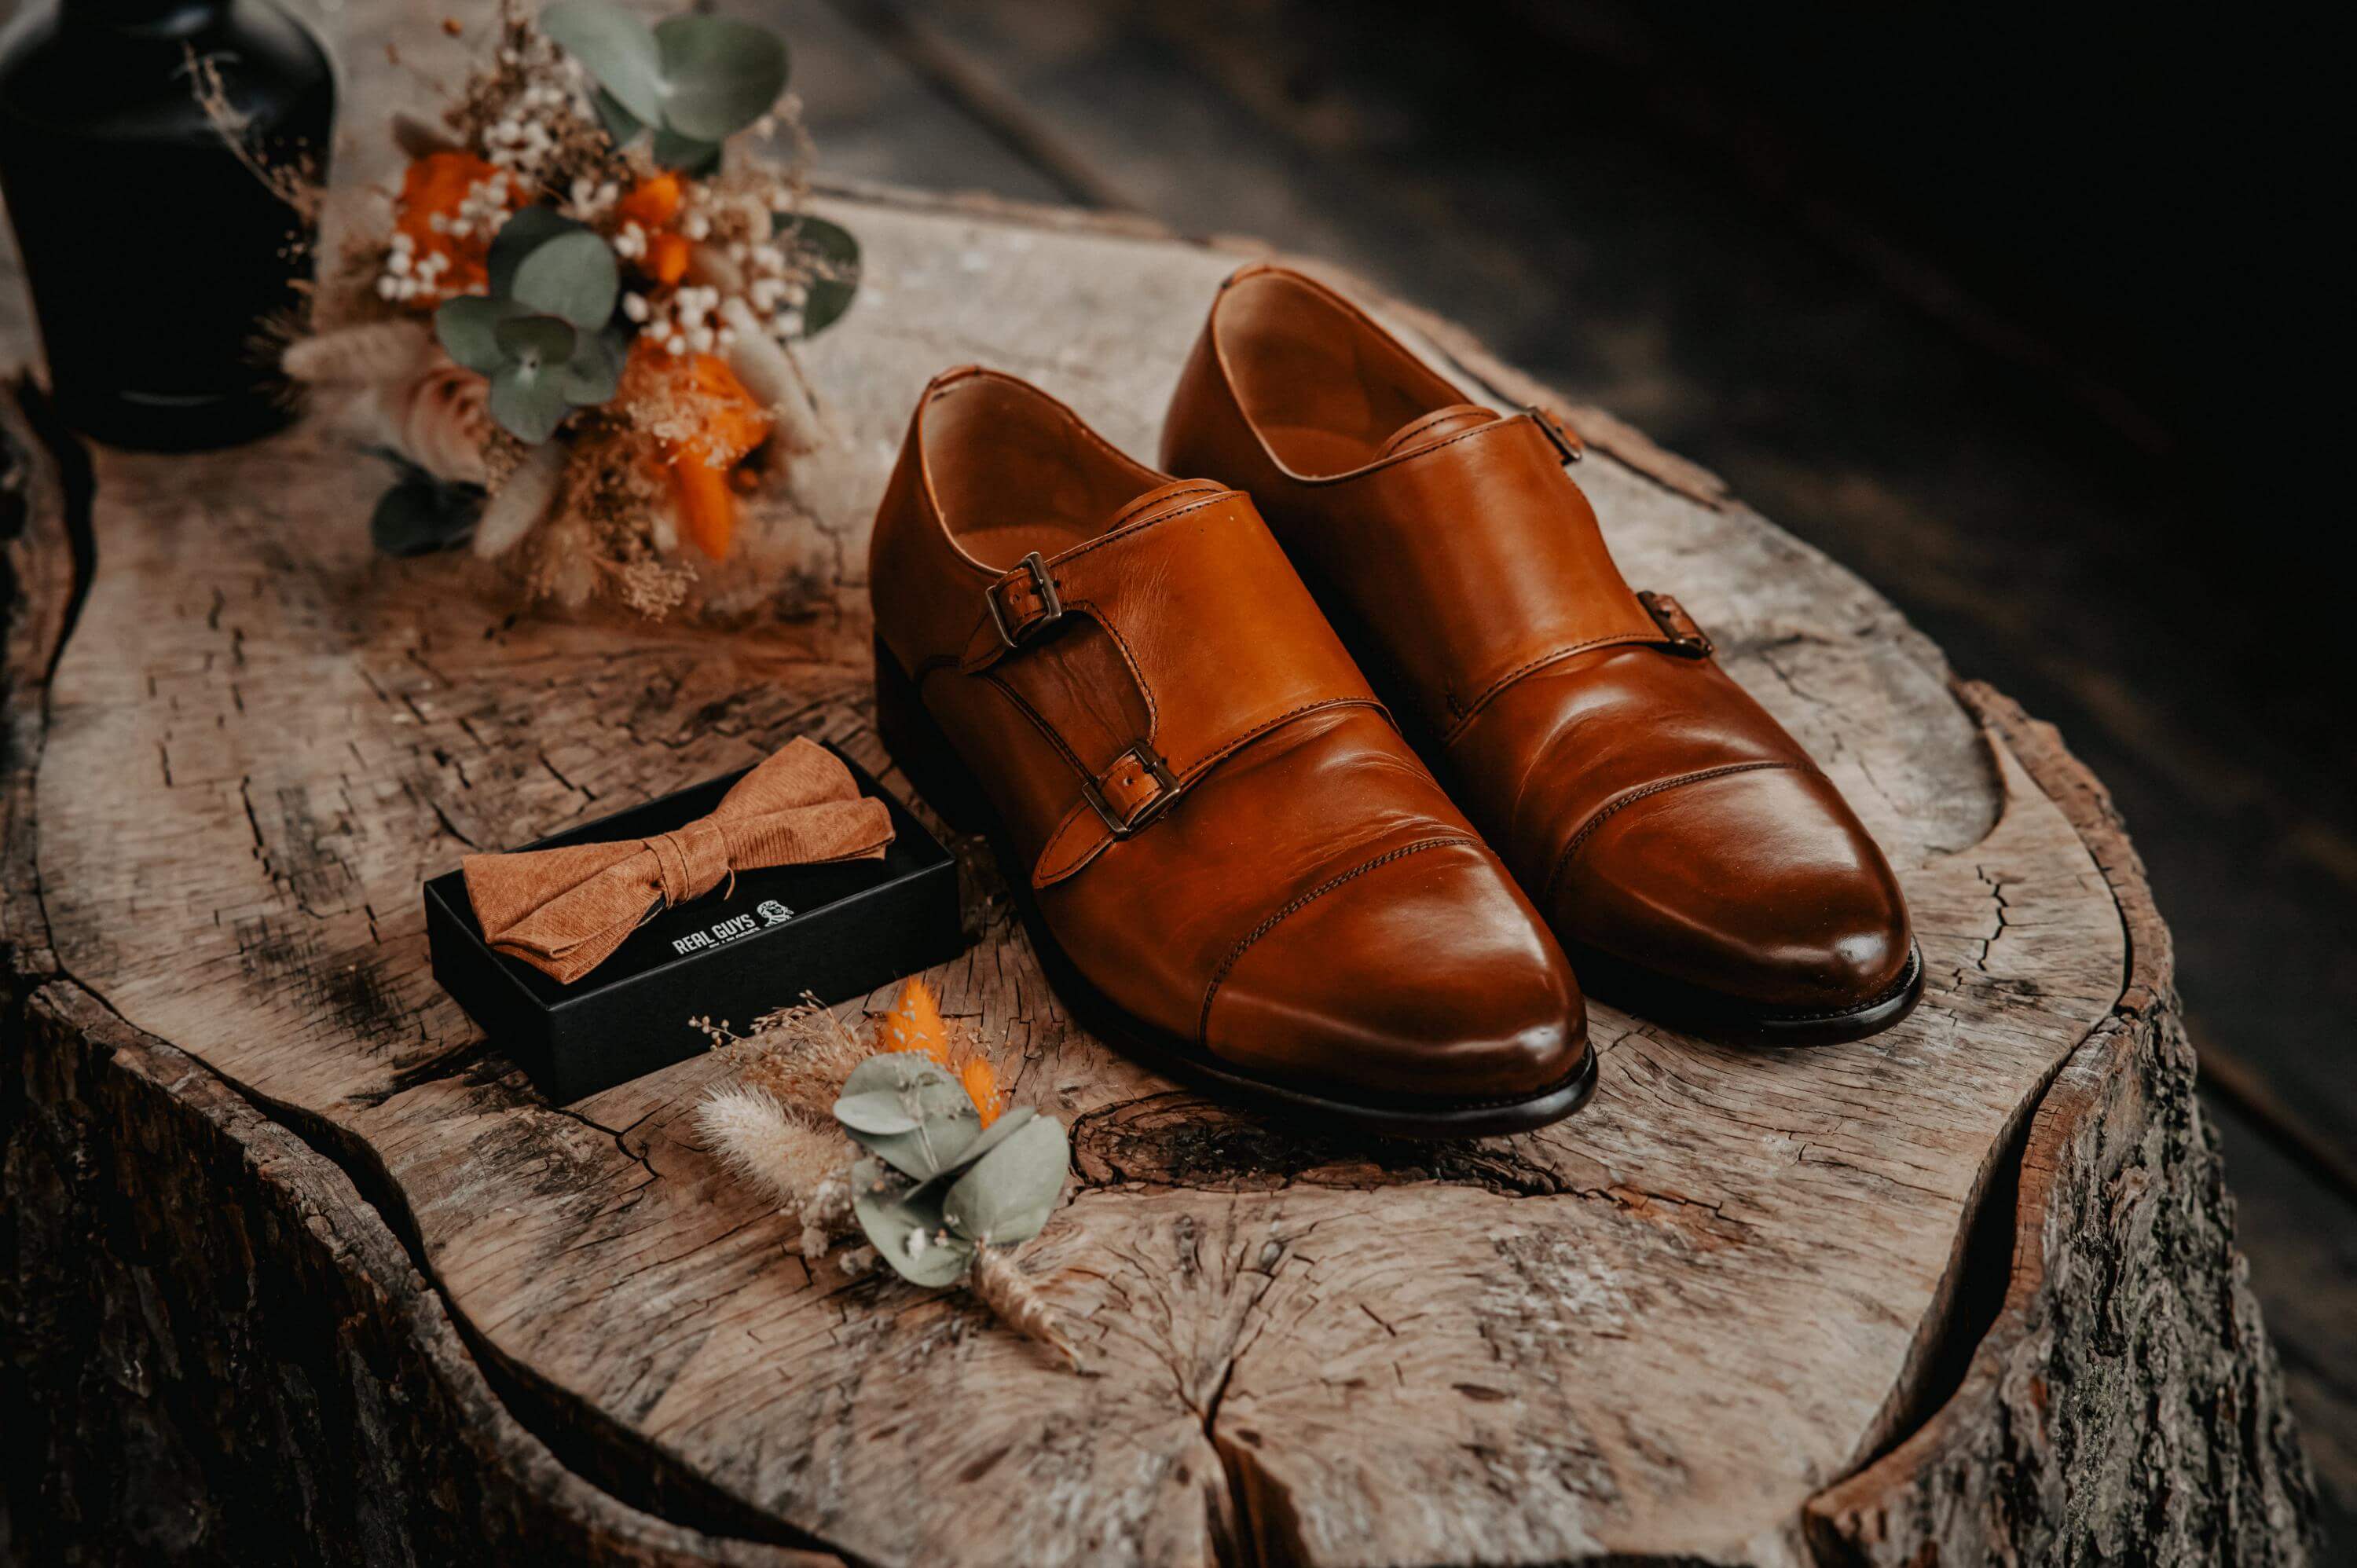 The groom's brown leather shoes and his noble brown fabric bow tie with brooches made of dried flowers are on a tree stump at the Getting Ready.